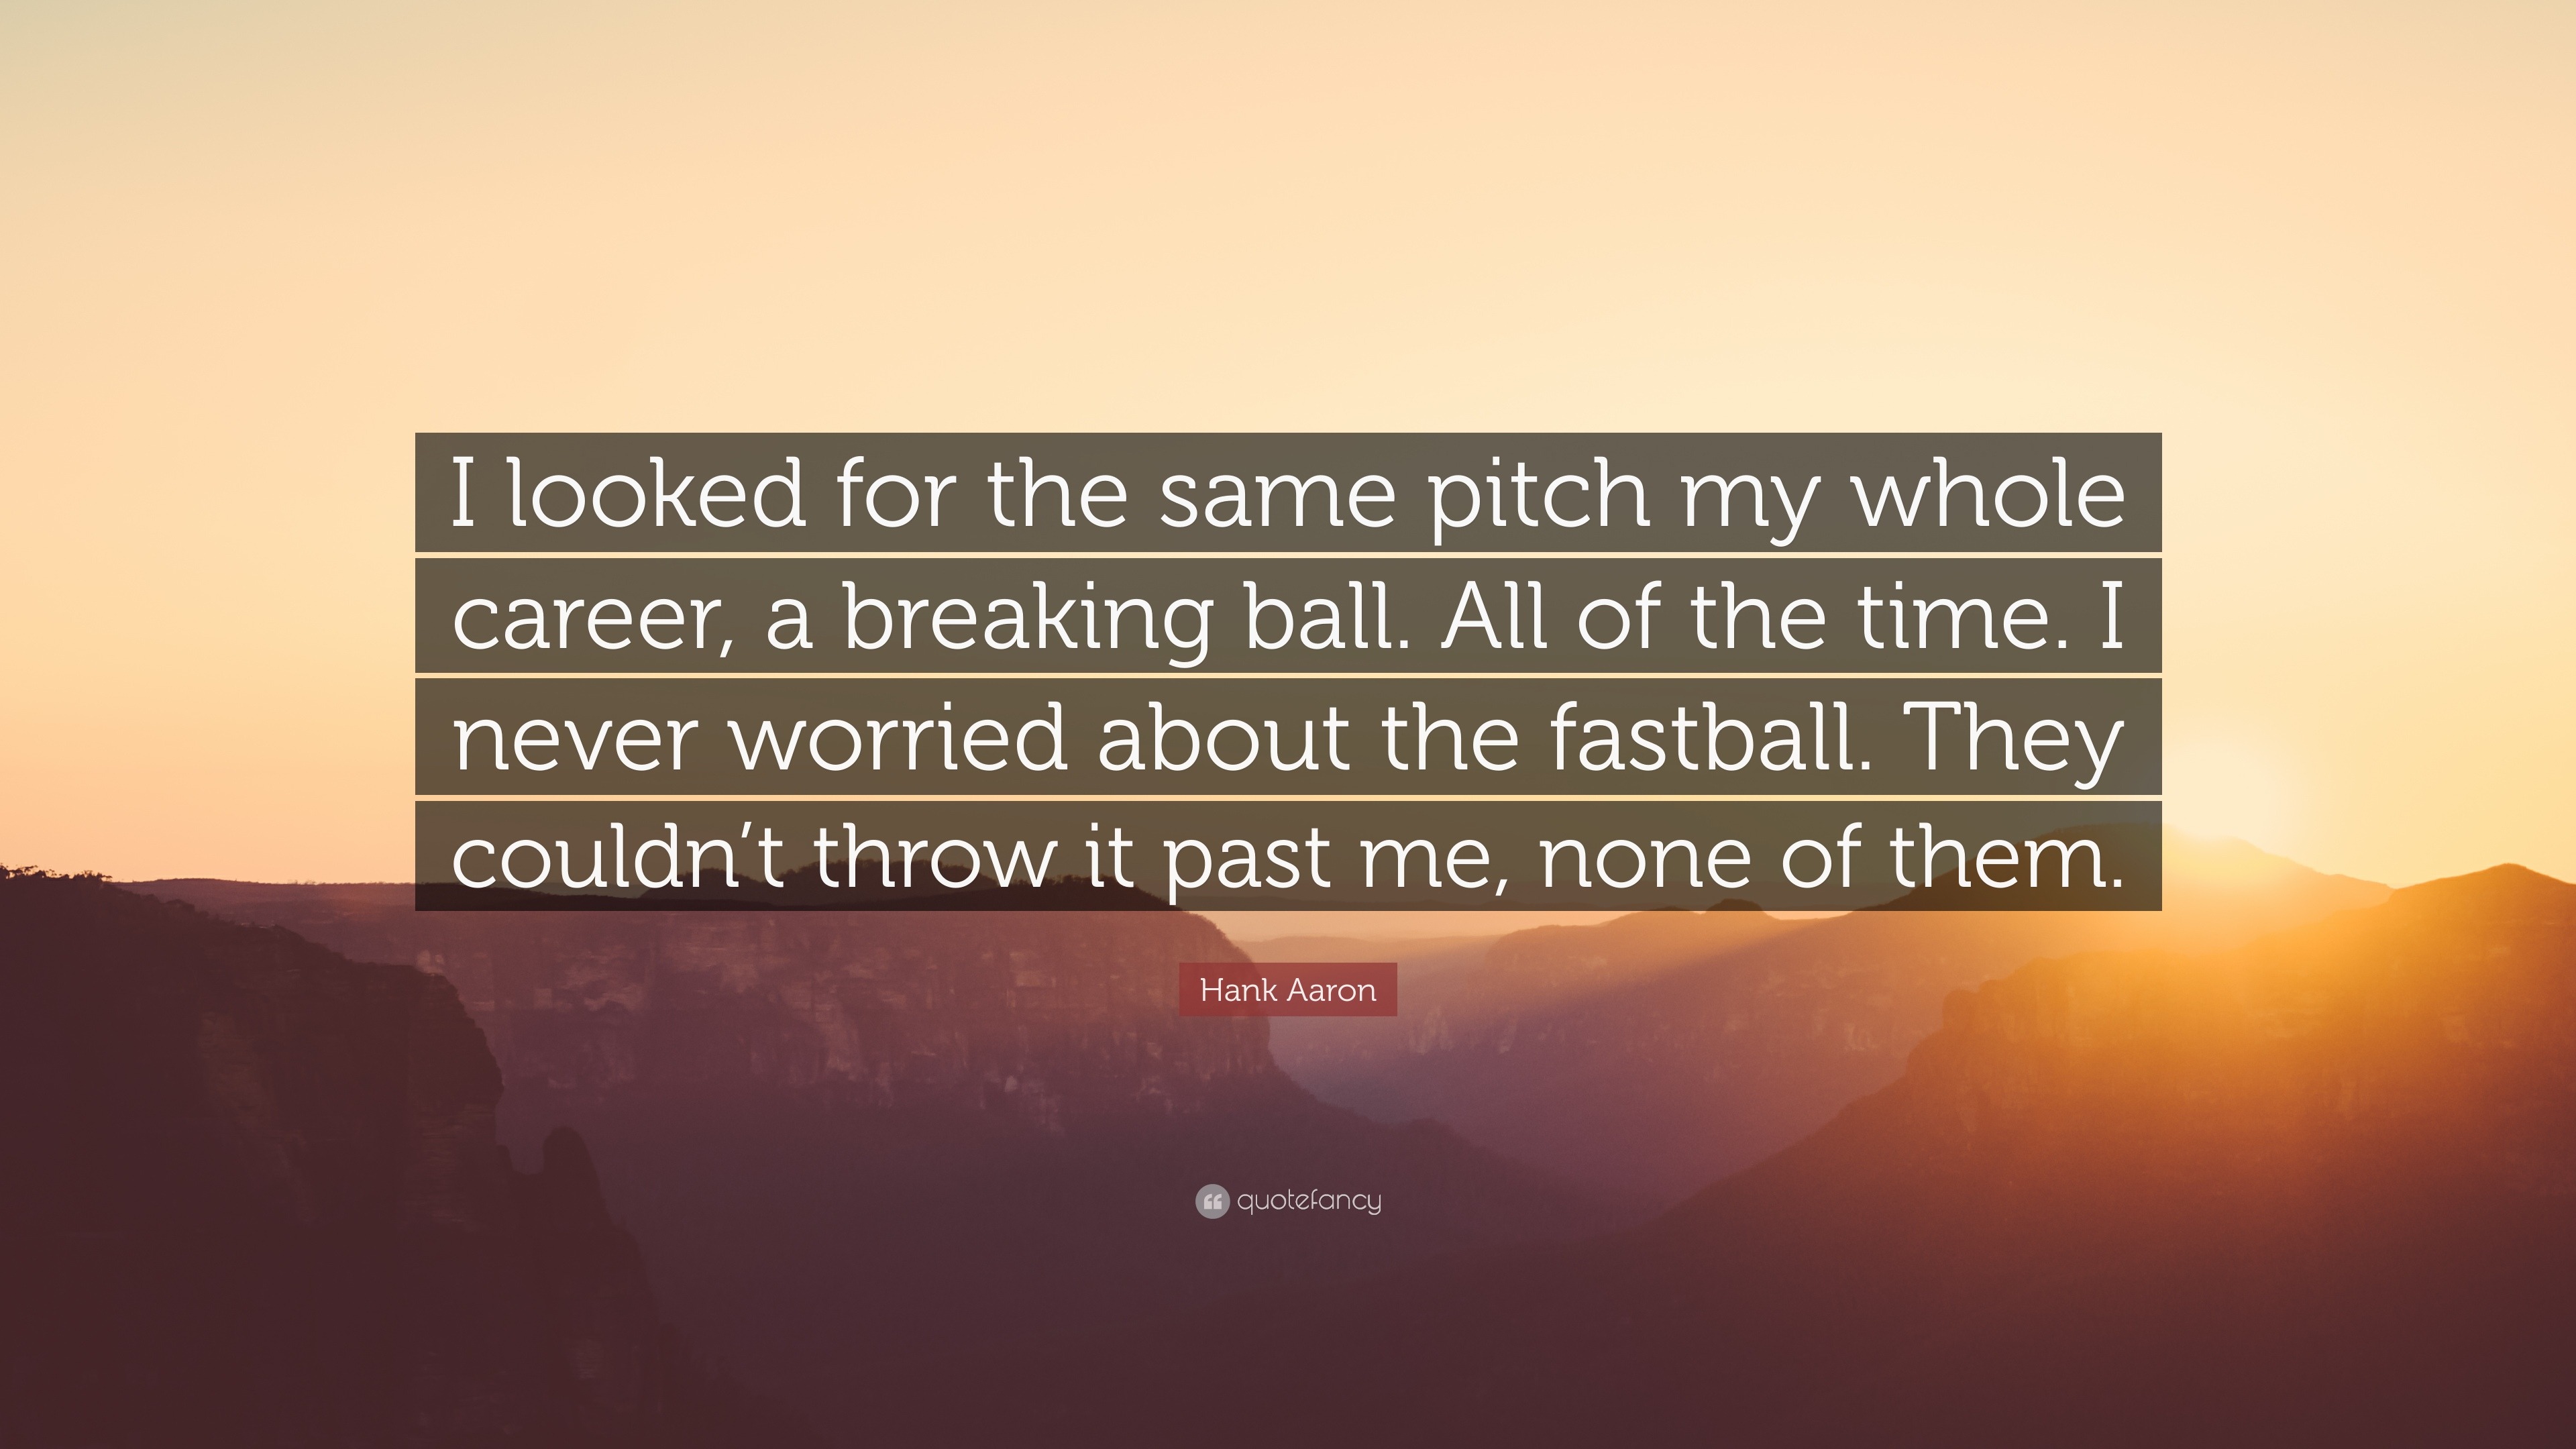 Hank Aaron Quote: “I don't see pitches down the middle anymore